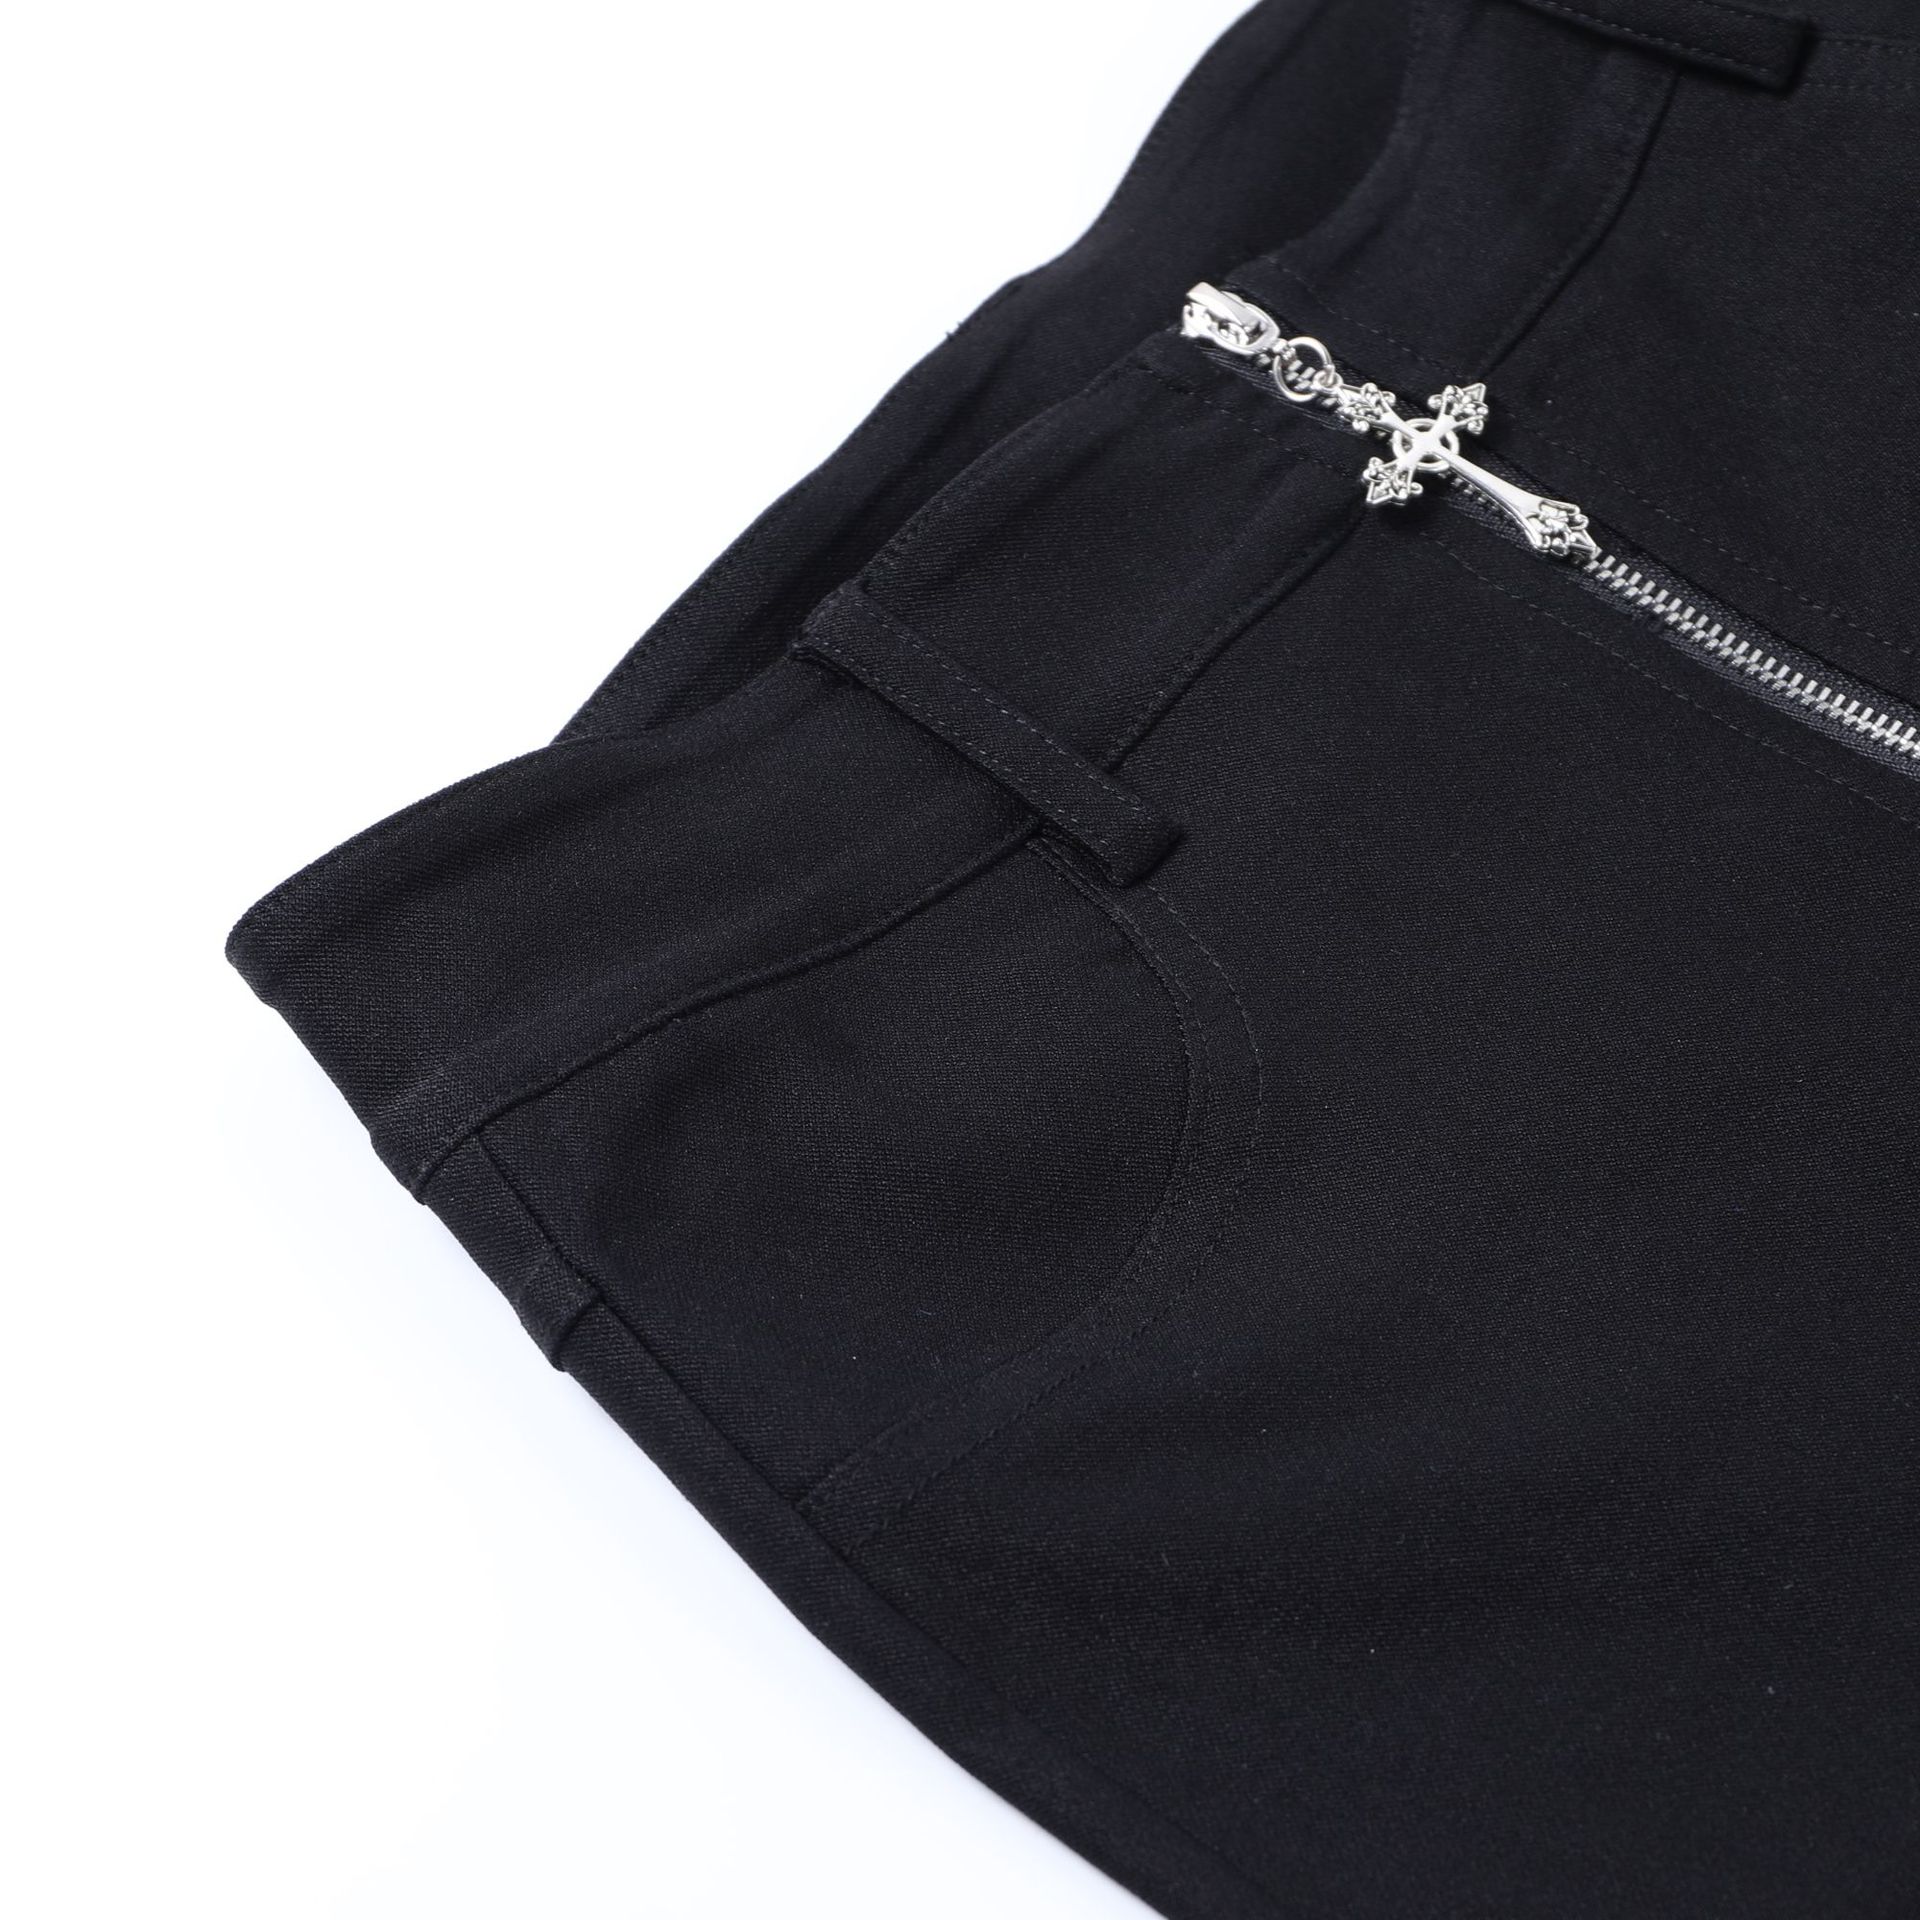 Crucifixion Zipper Solid Color Gothic Style High Waist Flared Pants NSGYB116449